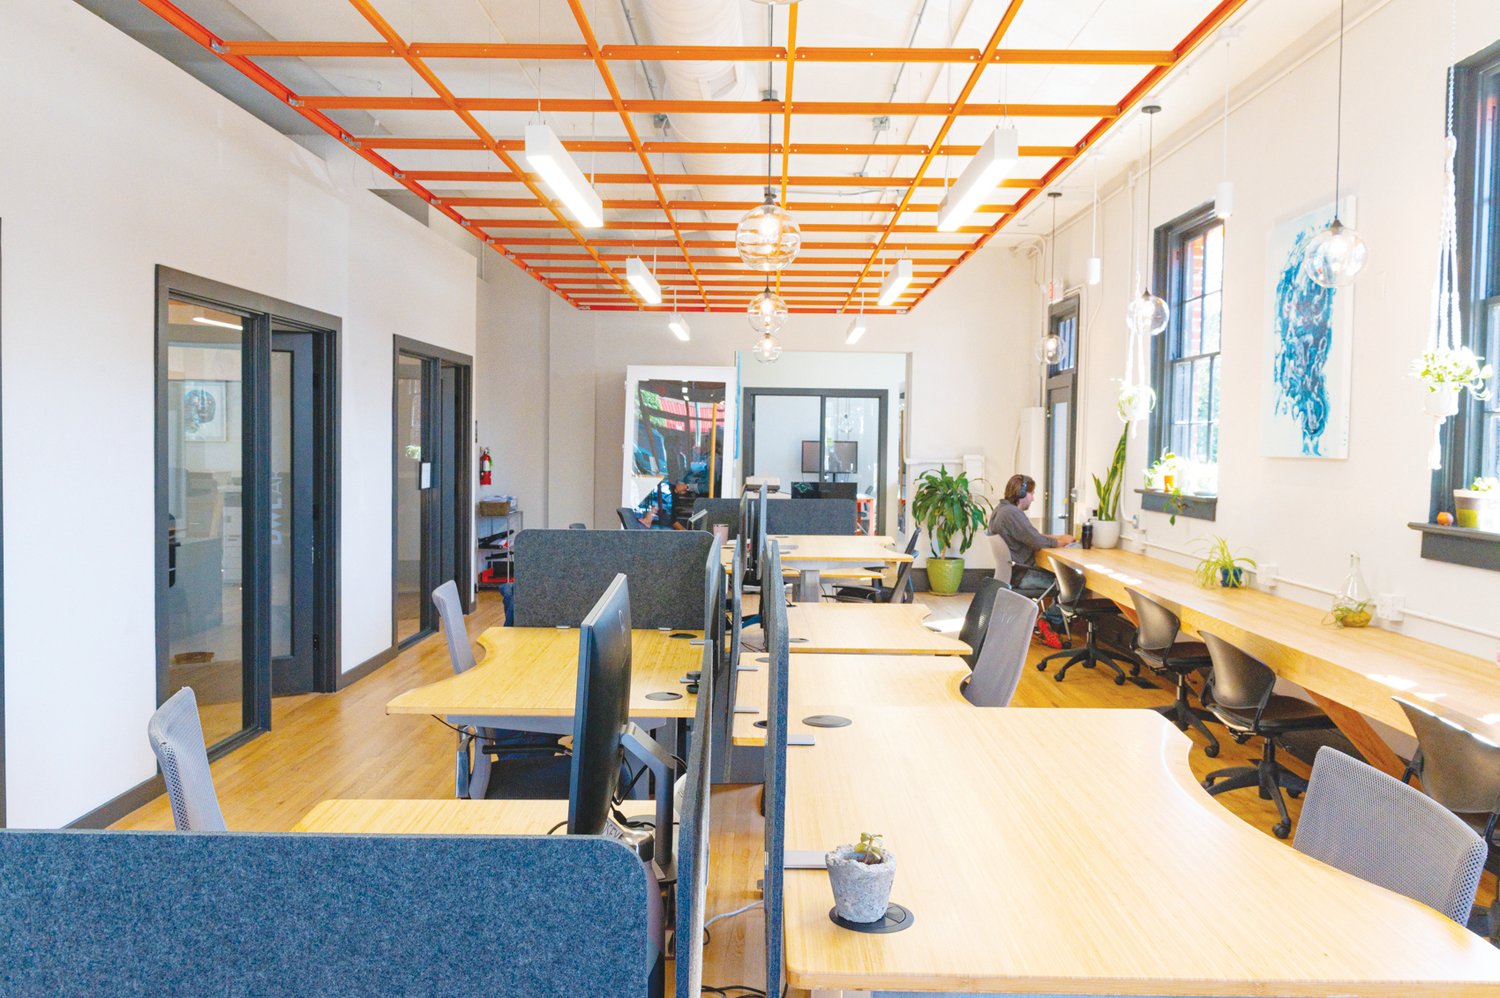 Perch Coworking's 2,000 square-foot space features 12 personal workspaces, three private office suites and a conference room that can be reserved by the hour.